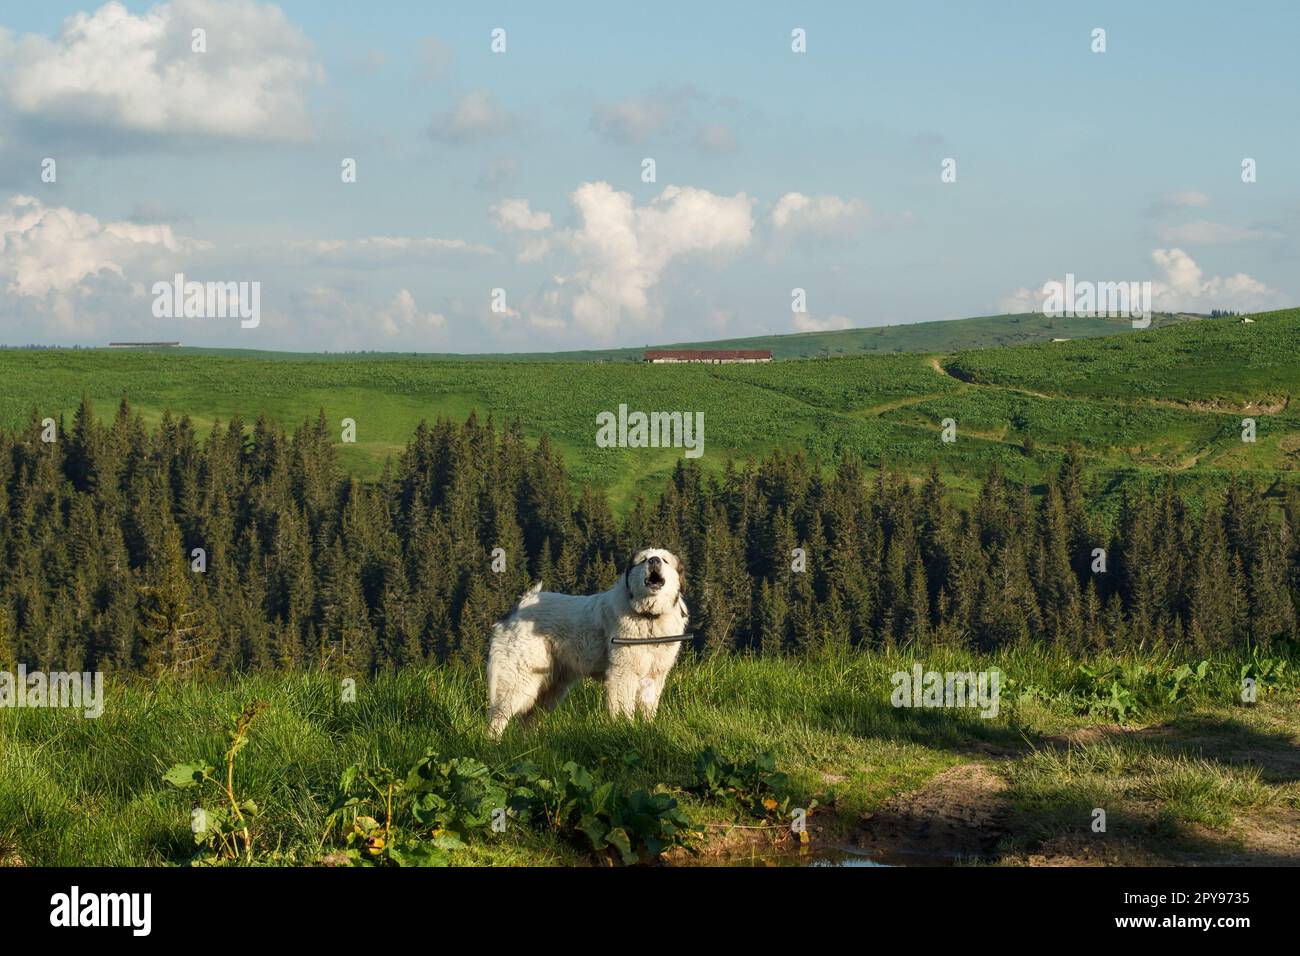 Great pyrenees dog howling on mountain slope scenic photography Stock Photo